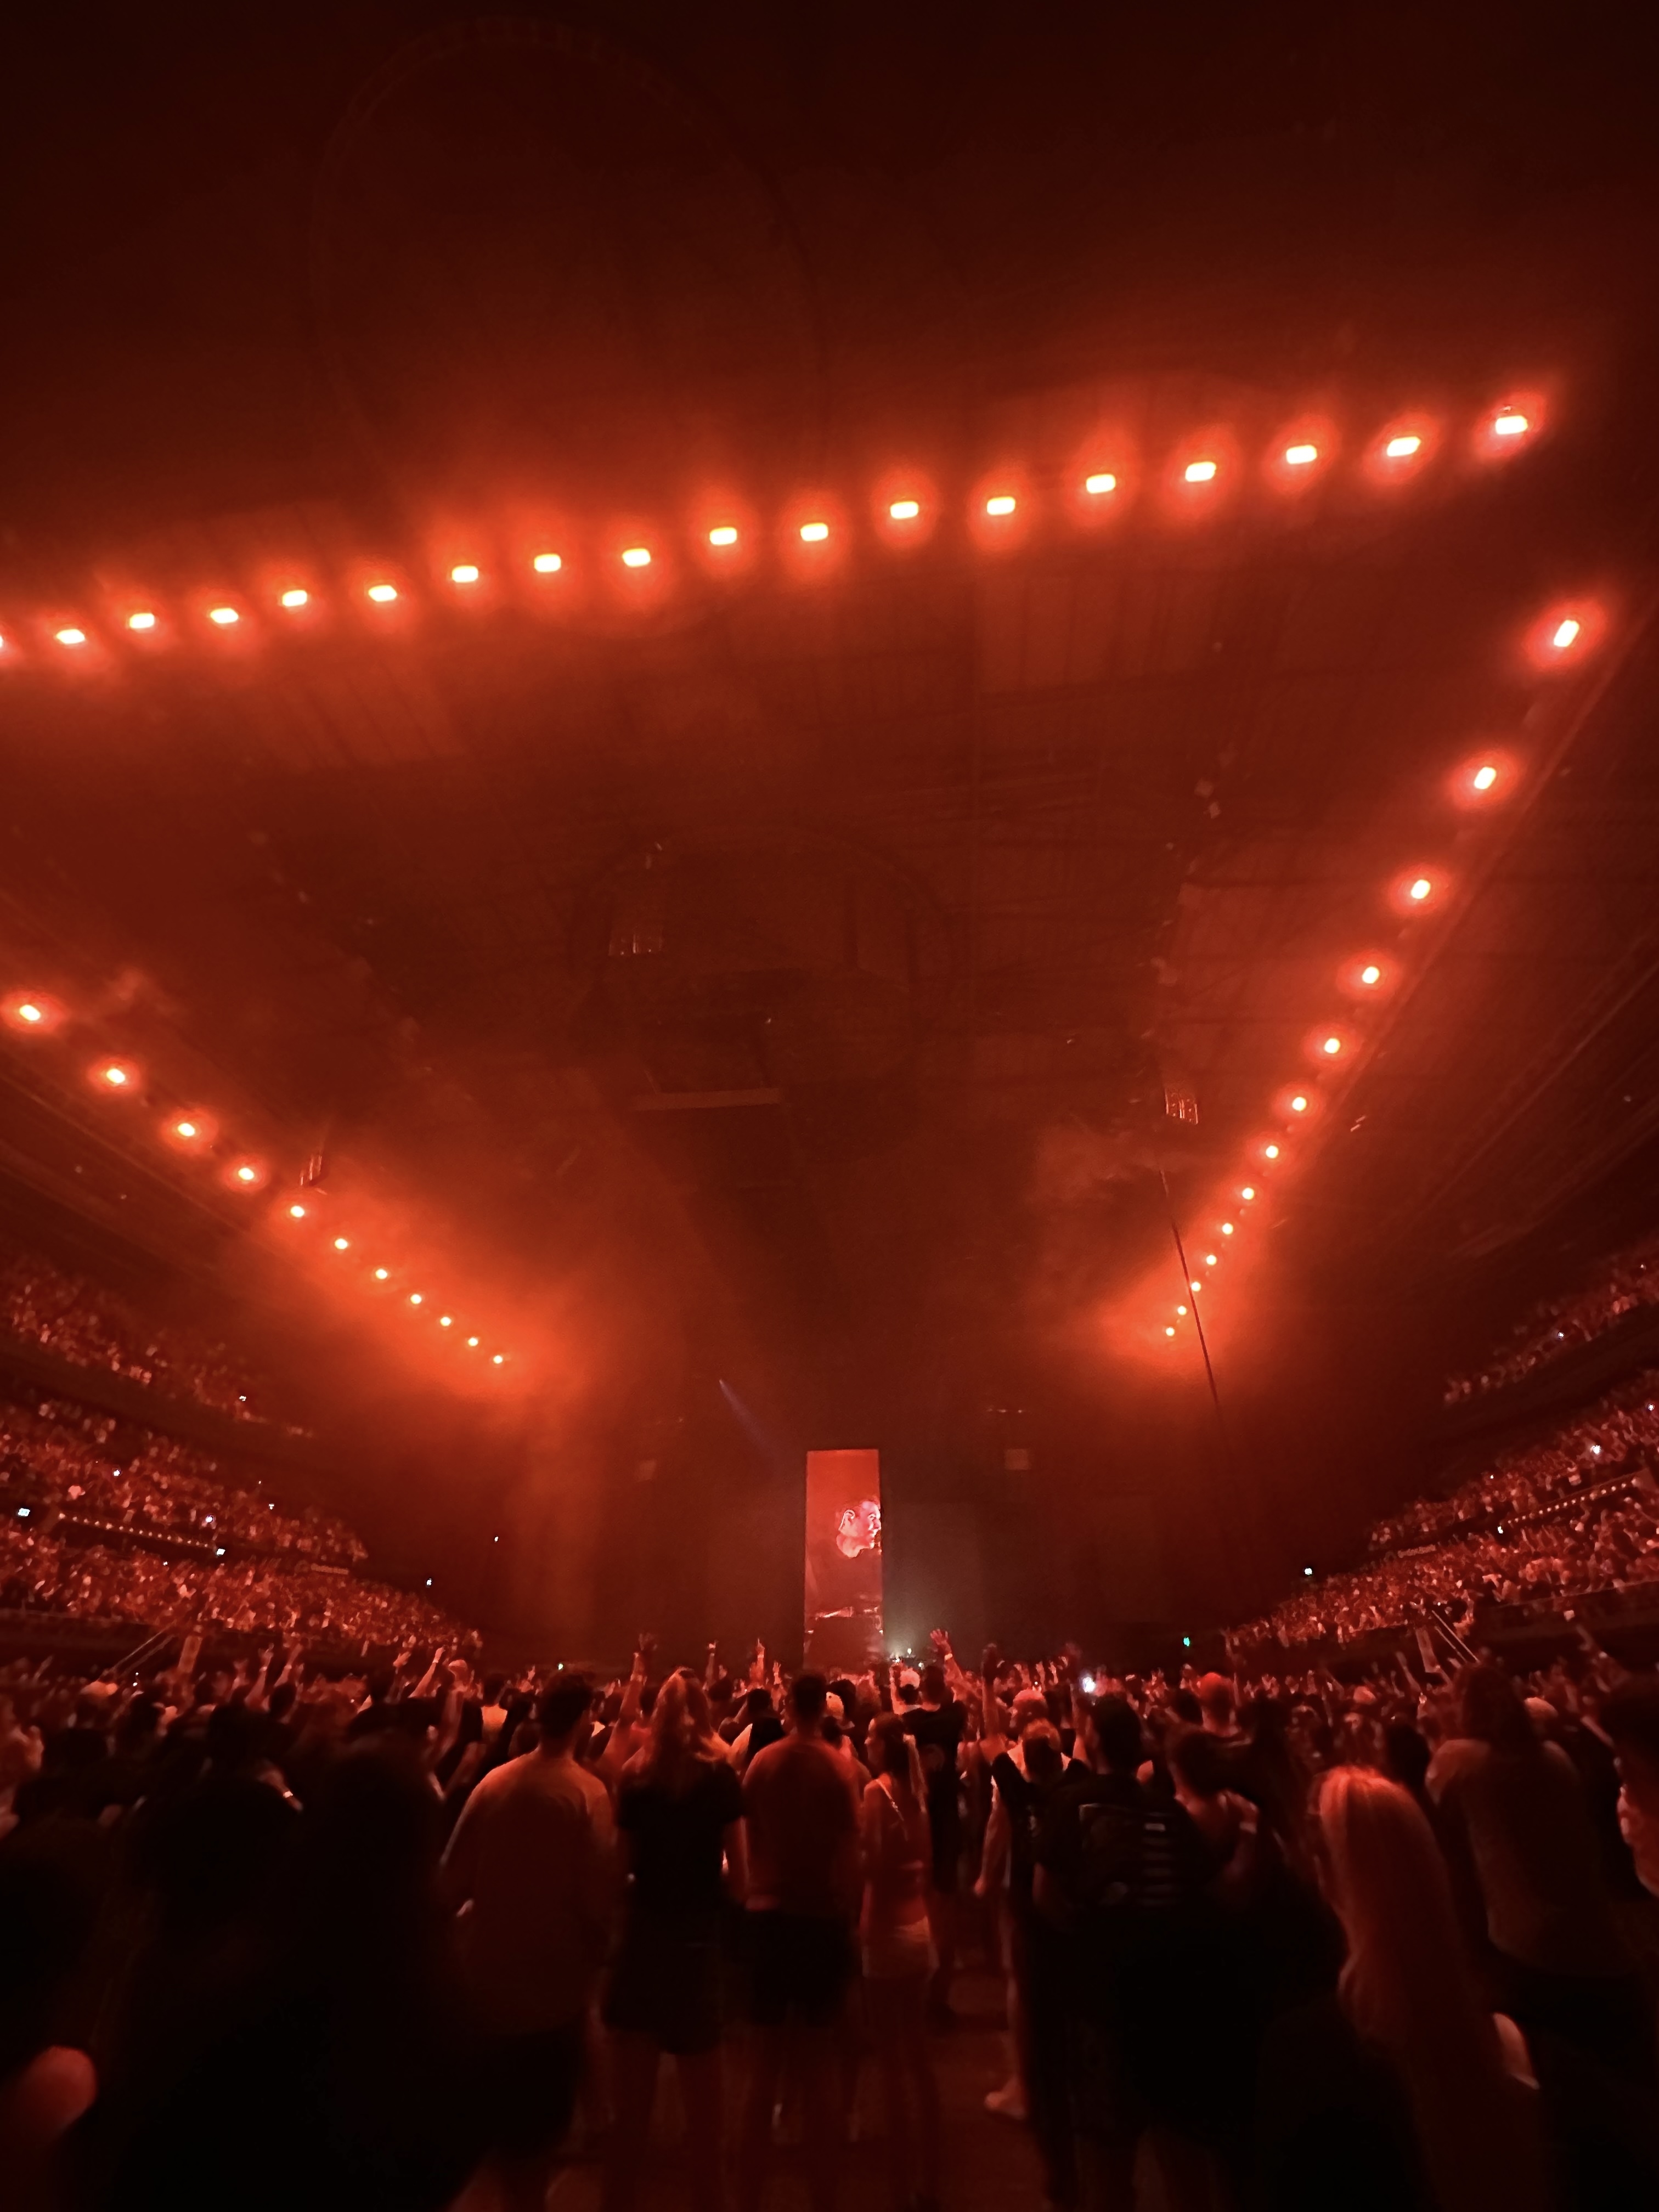 Crowd at a concert with stage lights overhead, creating a hazy atmosphere